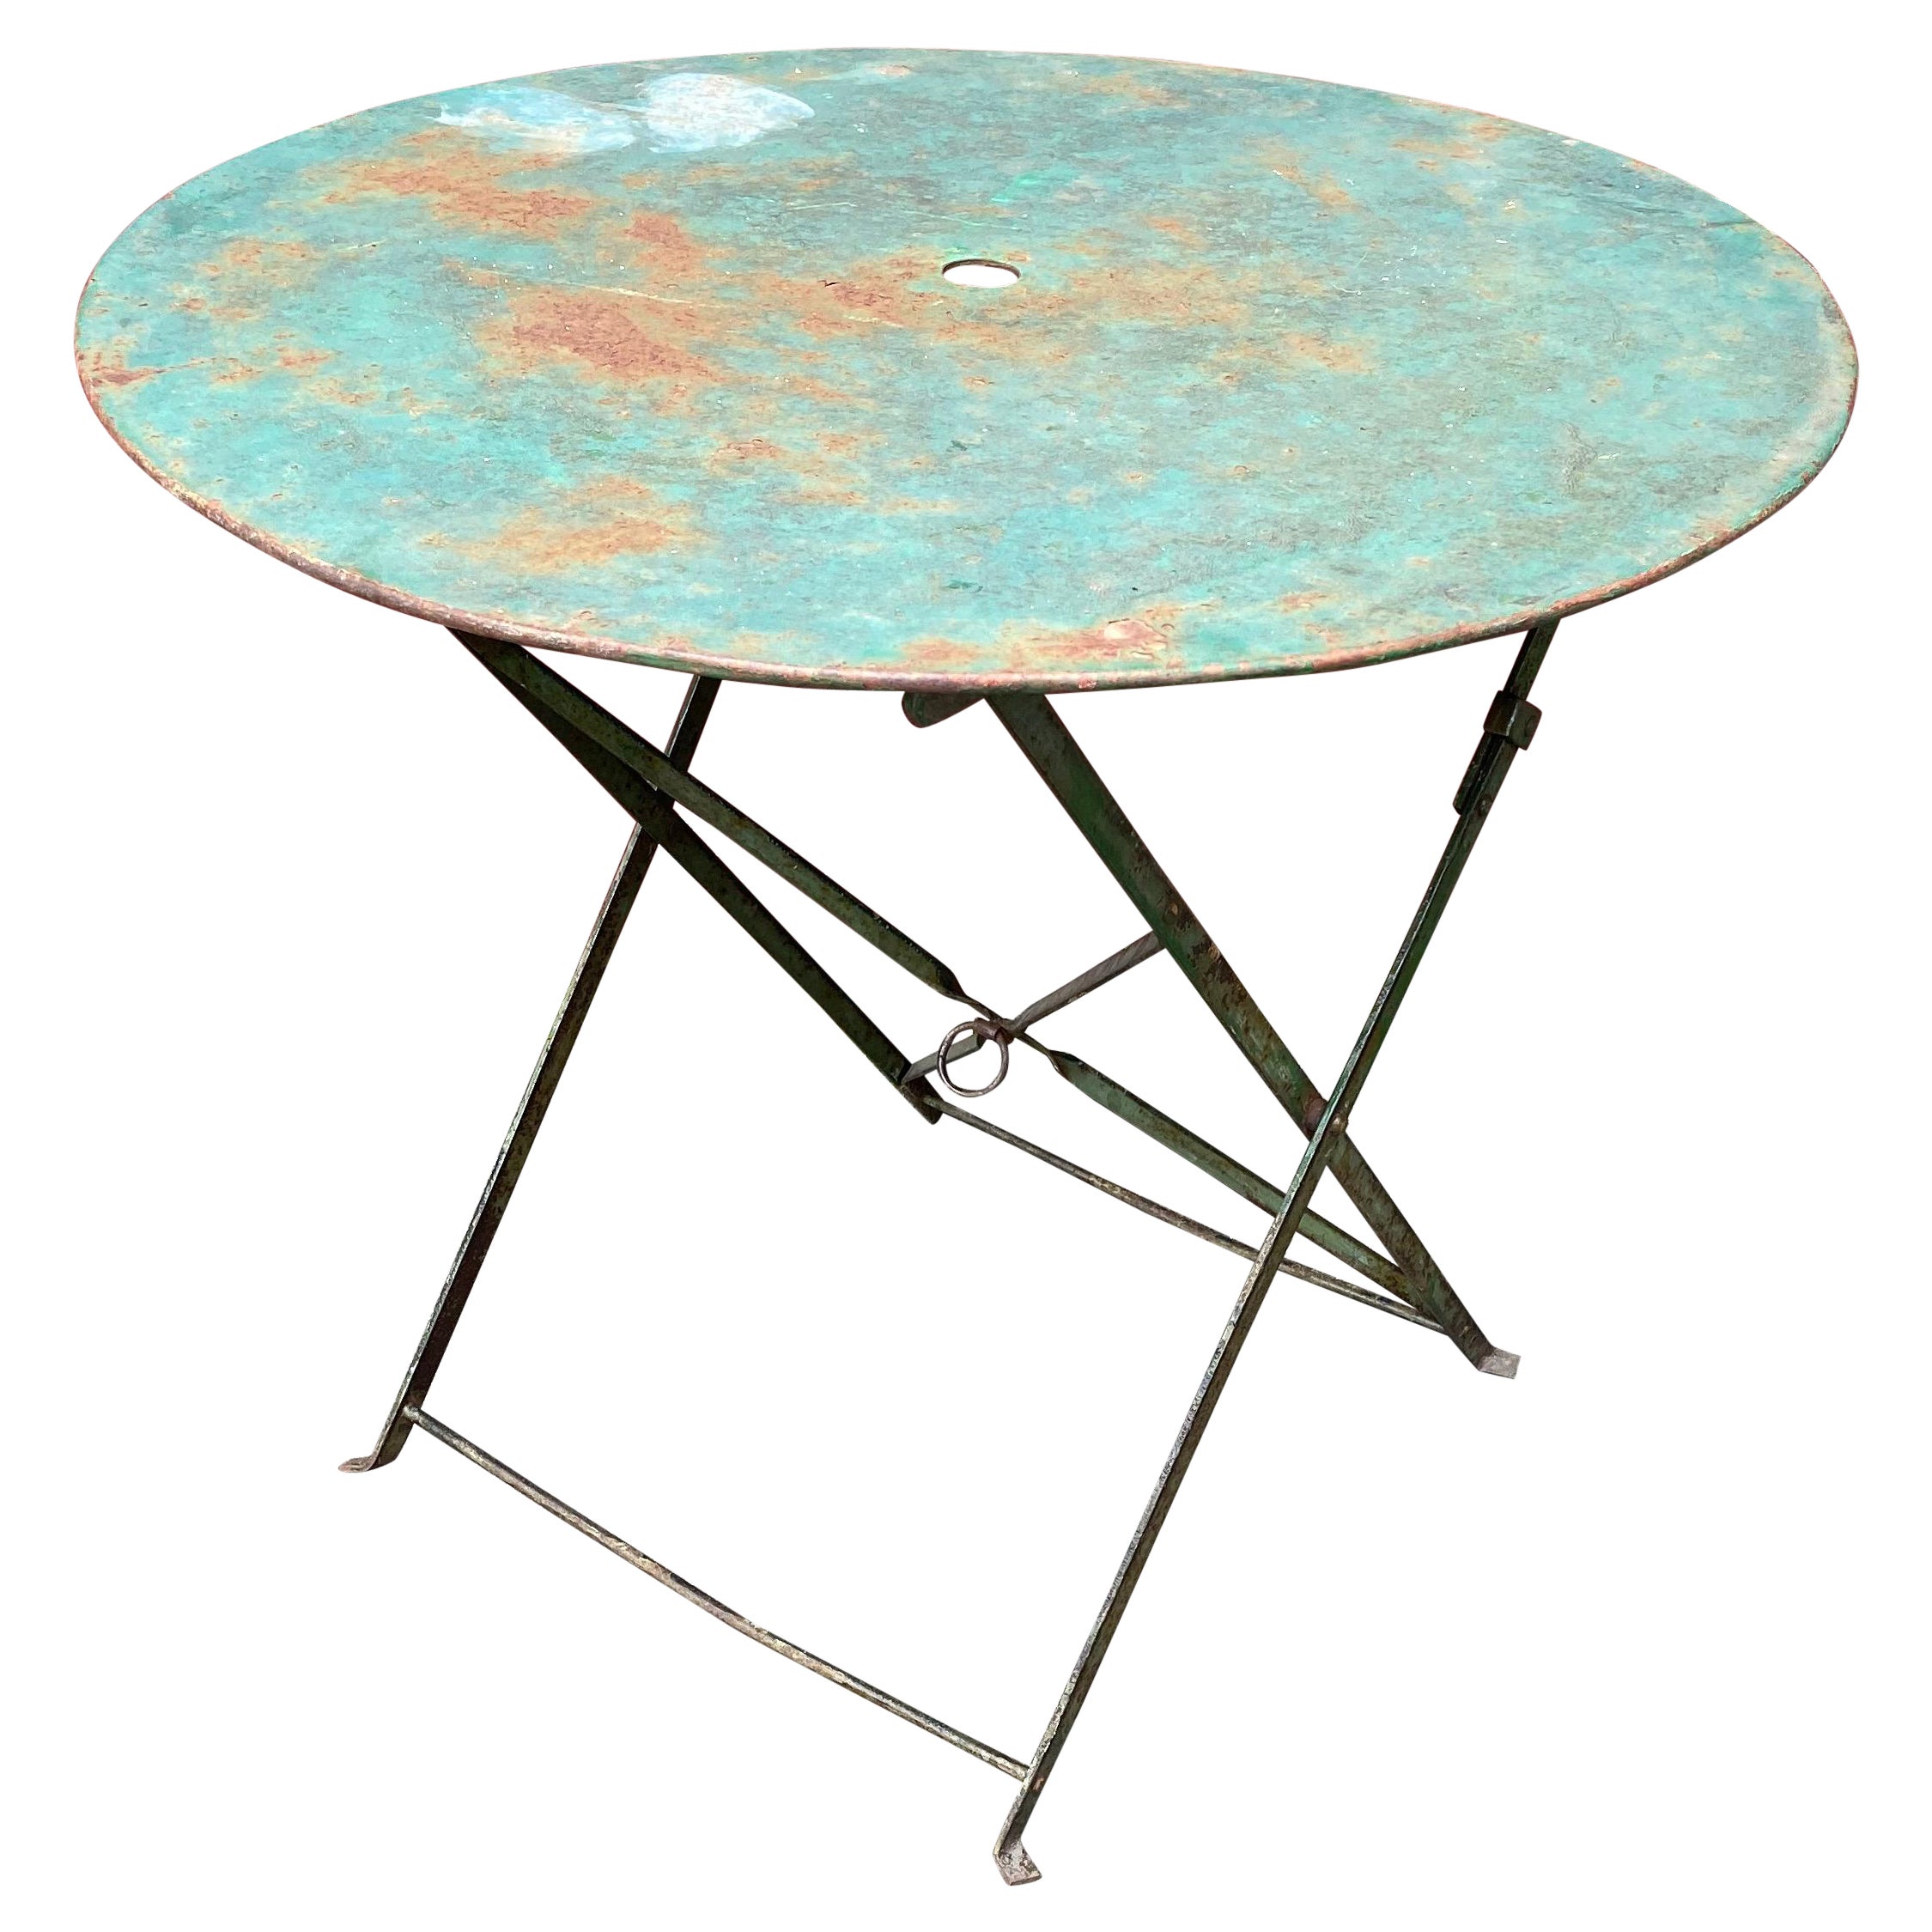 Small Green Painted Folding Garden Table